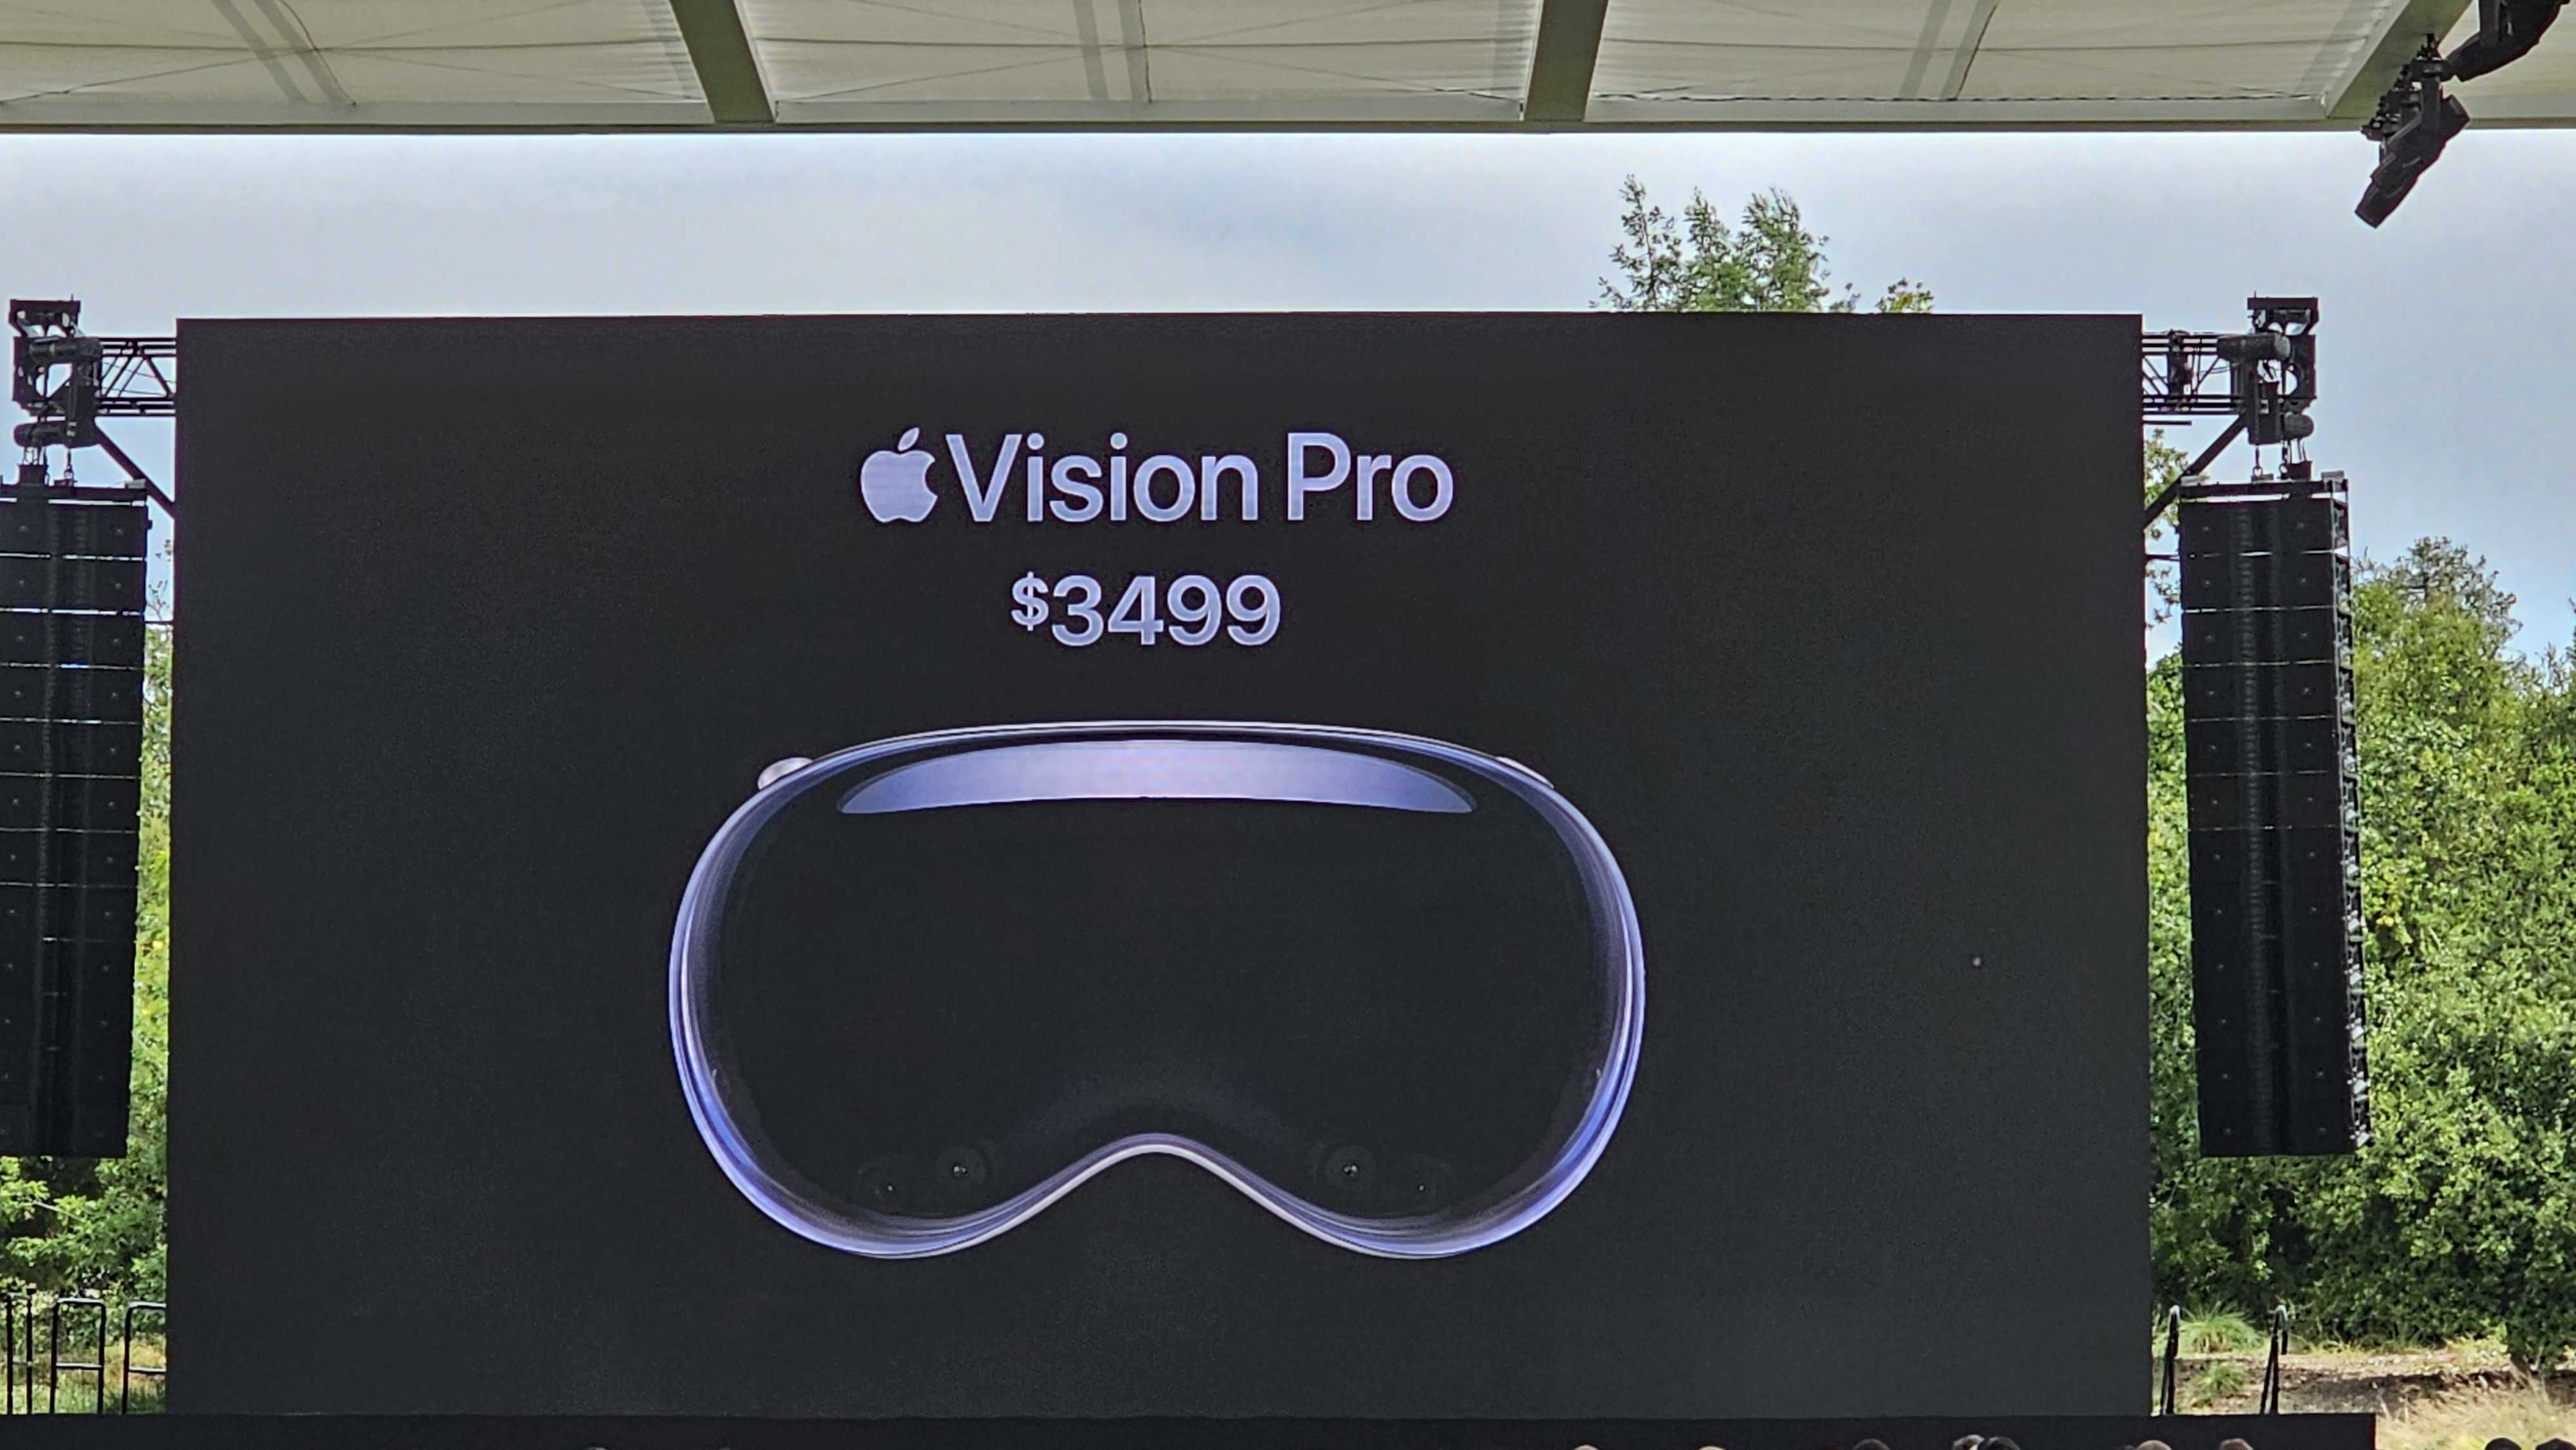 Apple Vision Pro with $3499 price